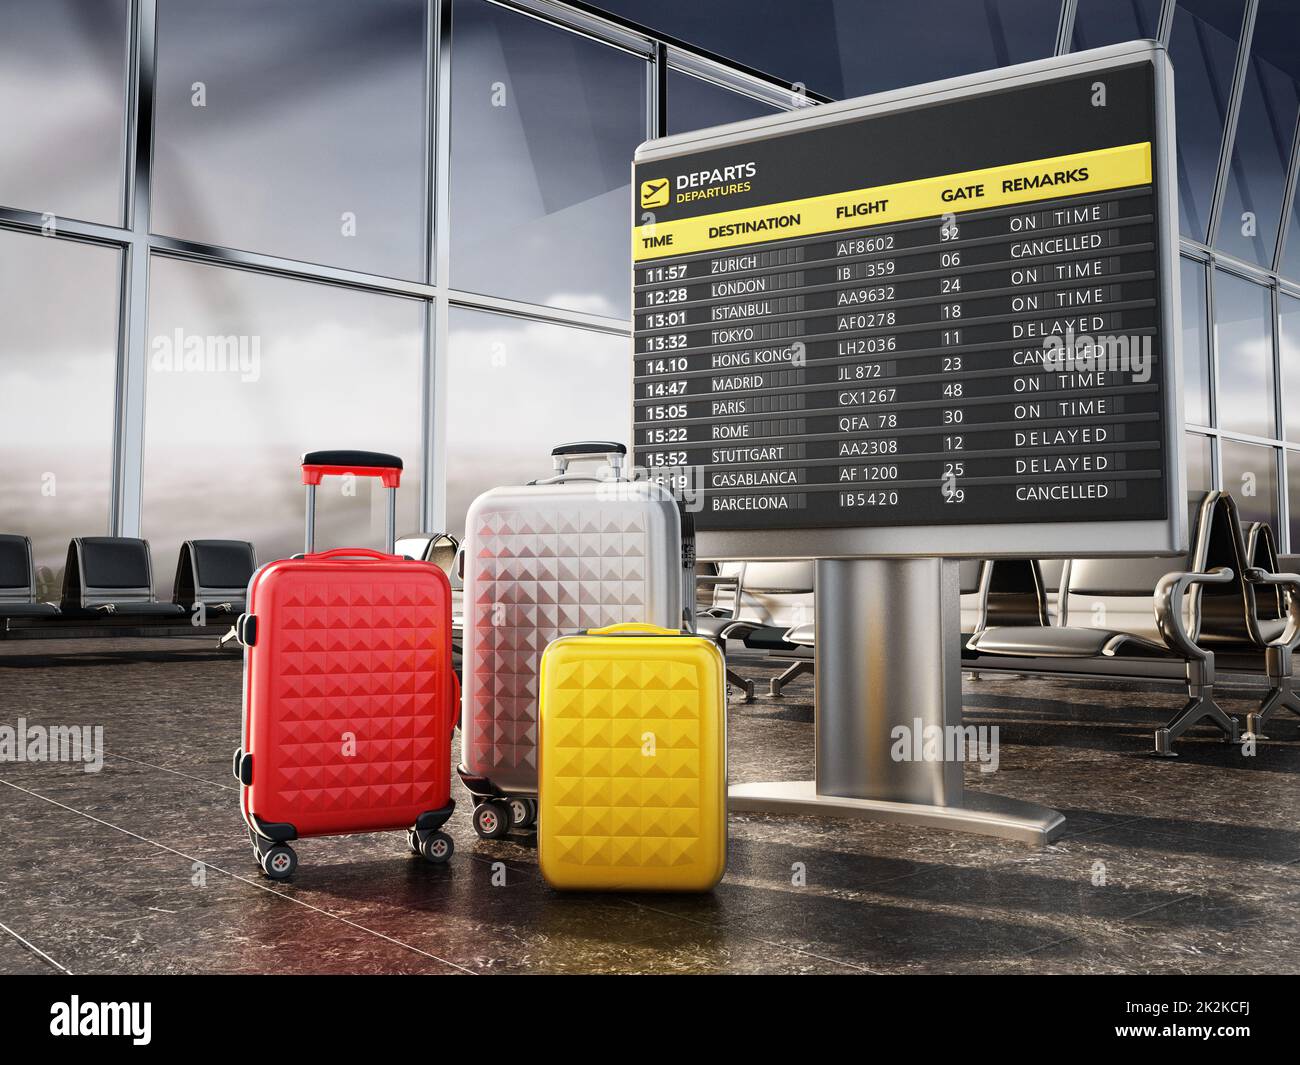 Airport boarding sign, and luggages inside airport waiting room. 3D illustration Stock Photo